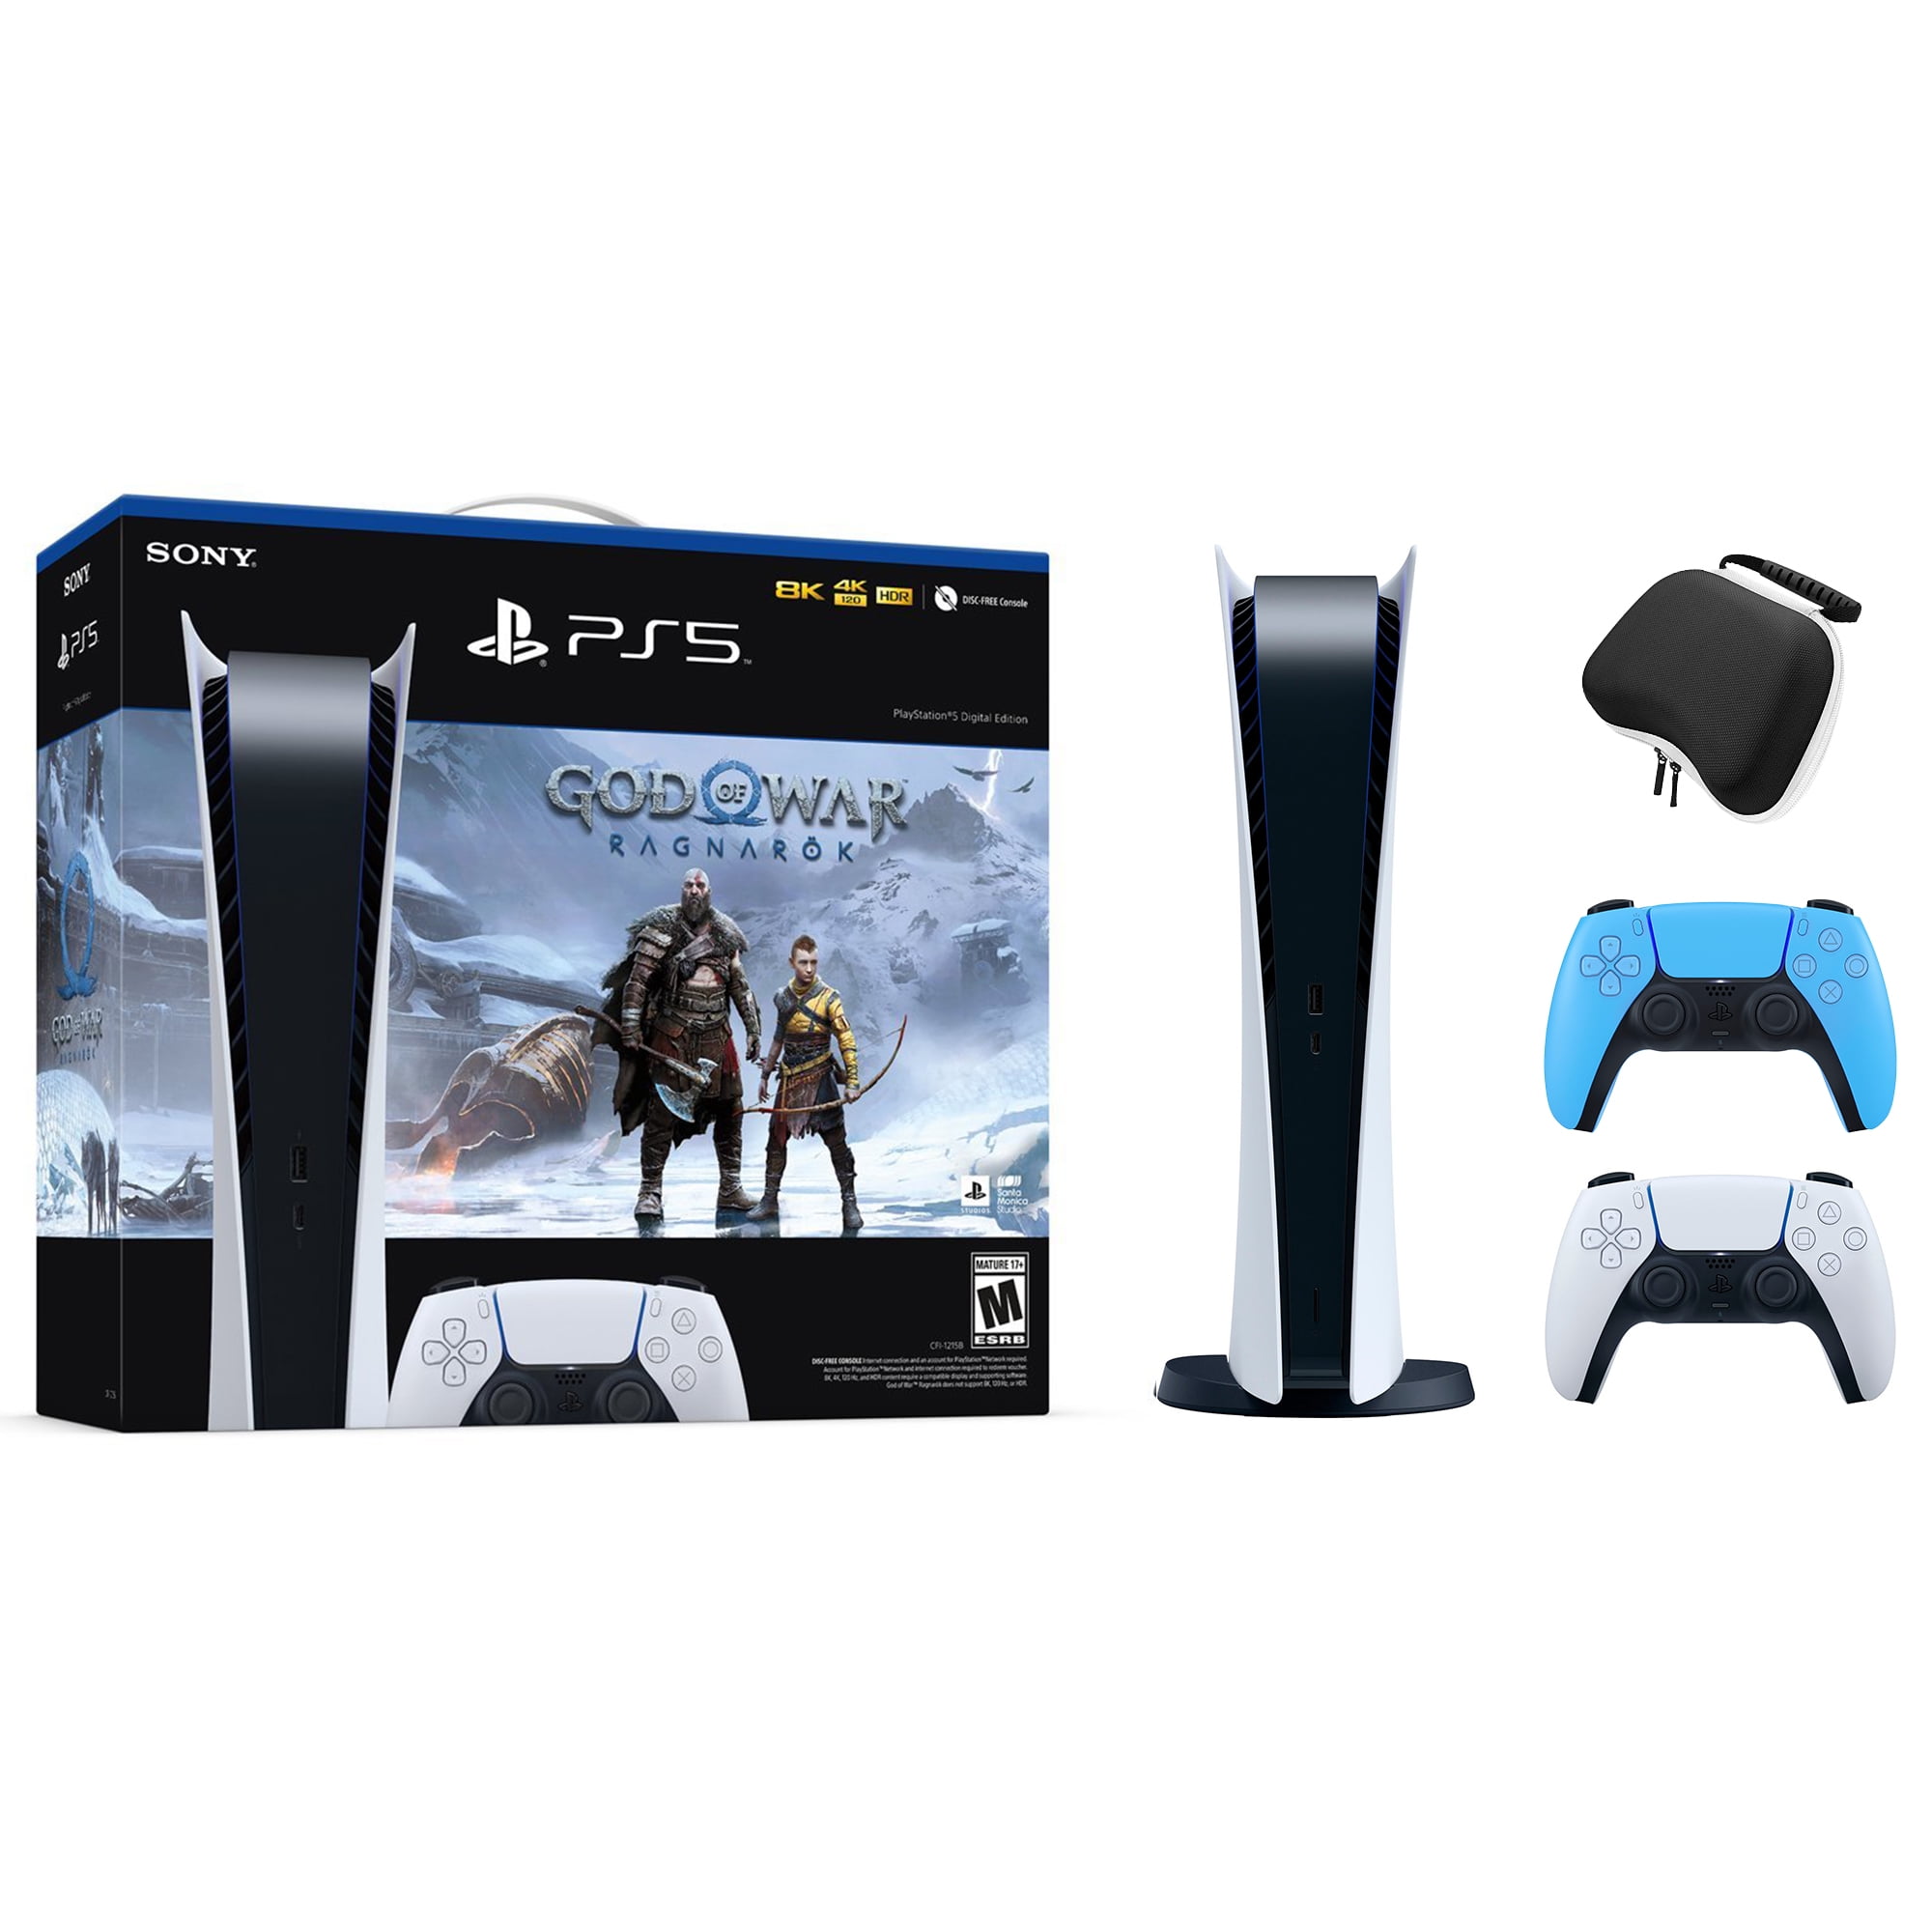 5 Digital Edition God of War Ragnarok Bundle, an Additional Mytrix Upgraded PS5 Controller with Back Paddles and Turbo Function, and Hard Shell Protective Controller - Walmart.com